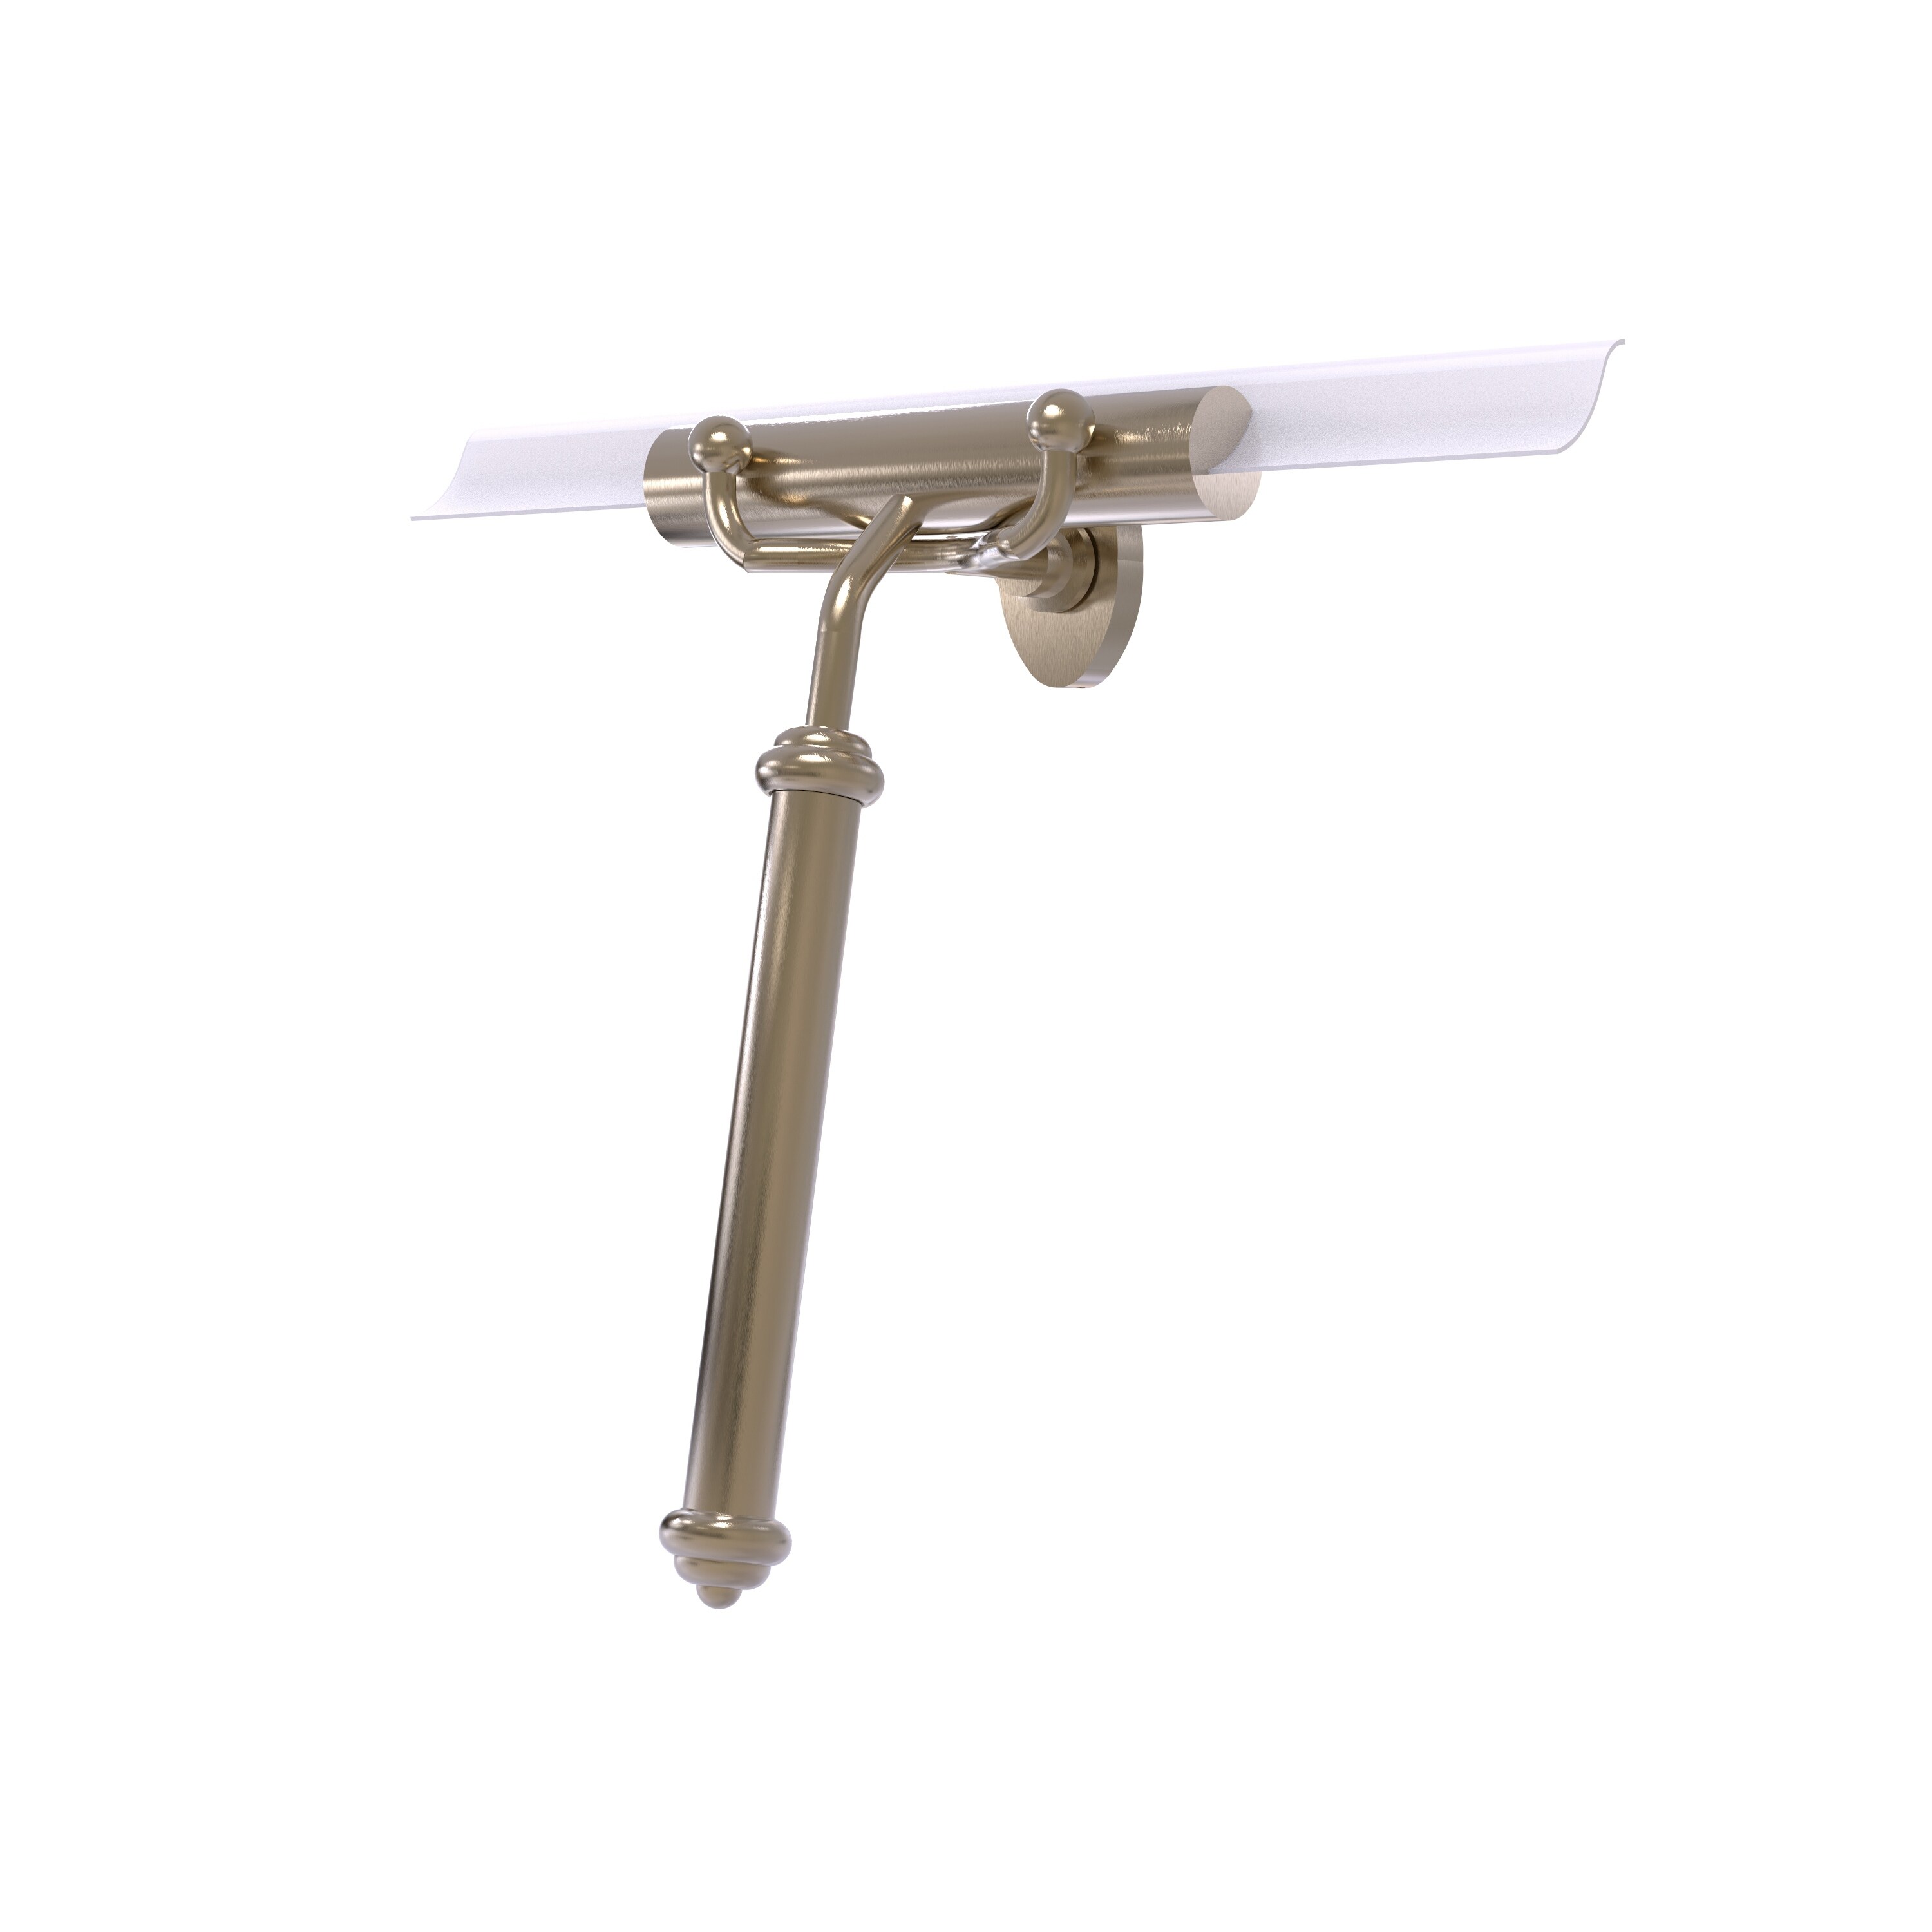 Allied Brass Shower Squeegee with Smooth Handle - Bed Bath & Beyond -  28239932